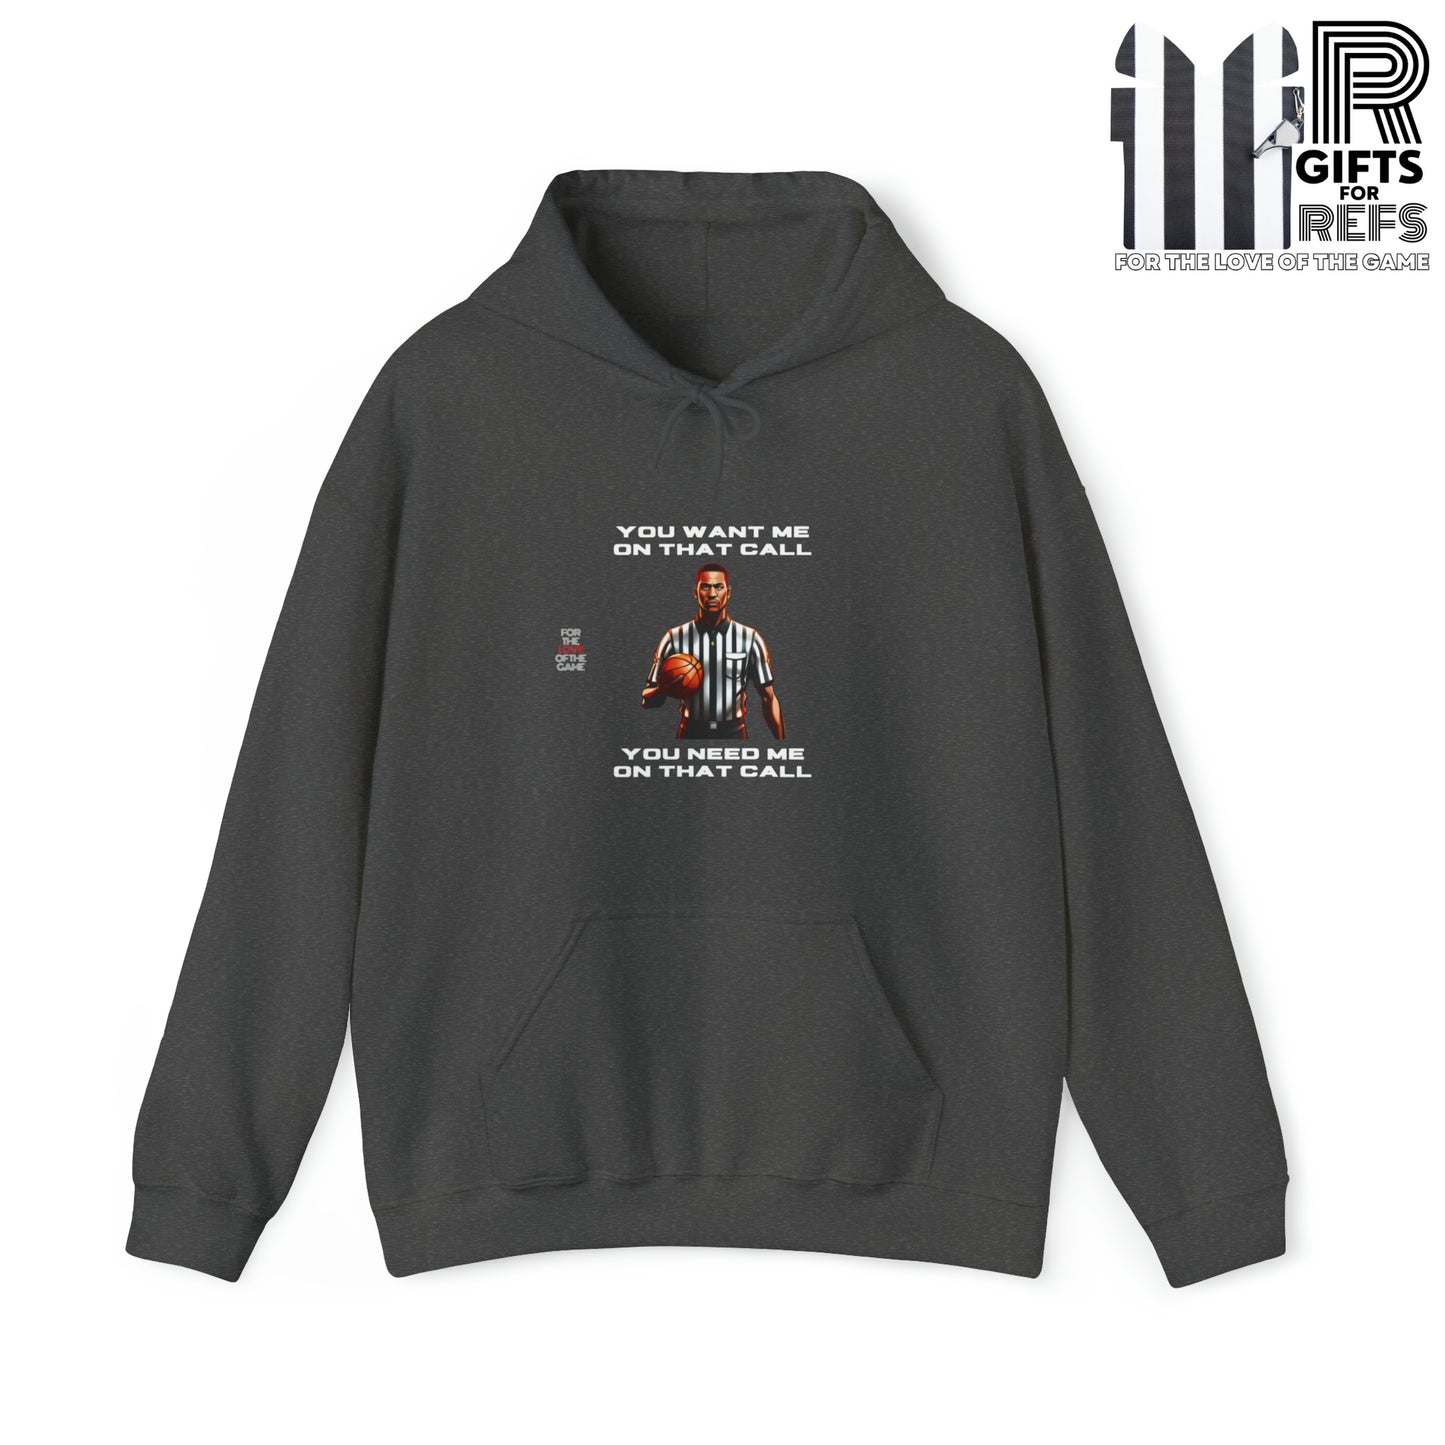 You Want Me On That Call Unisex Heavy Blend™ Hooded Sweatshirt | Gifts for referees | For sports officials